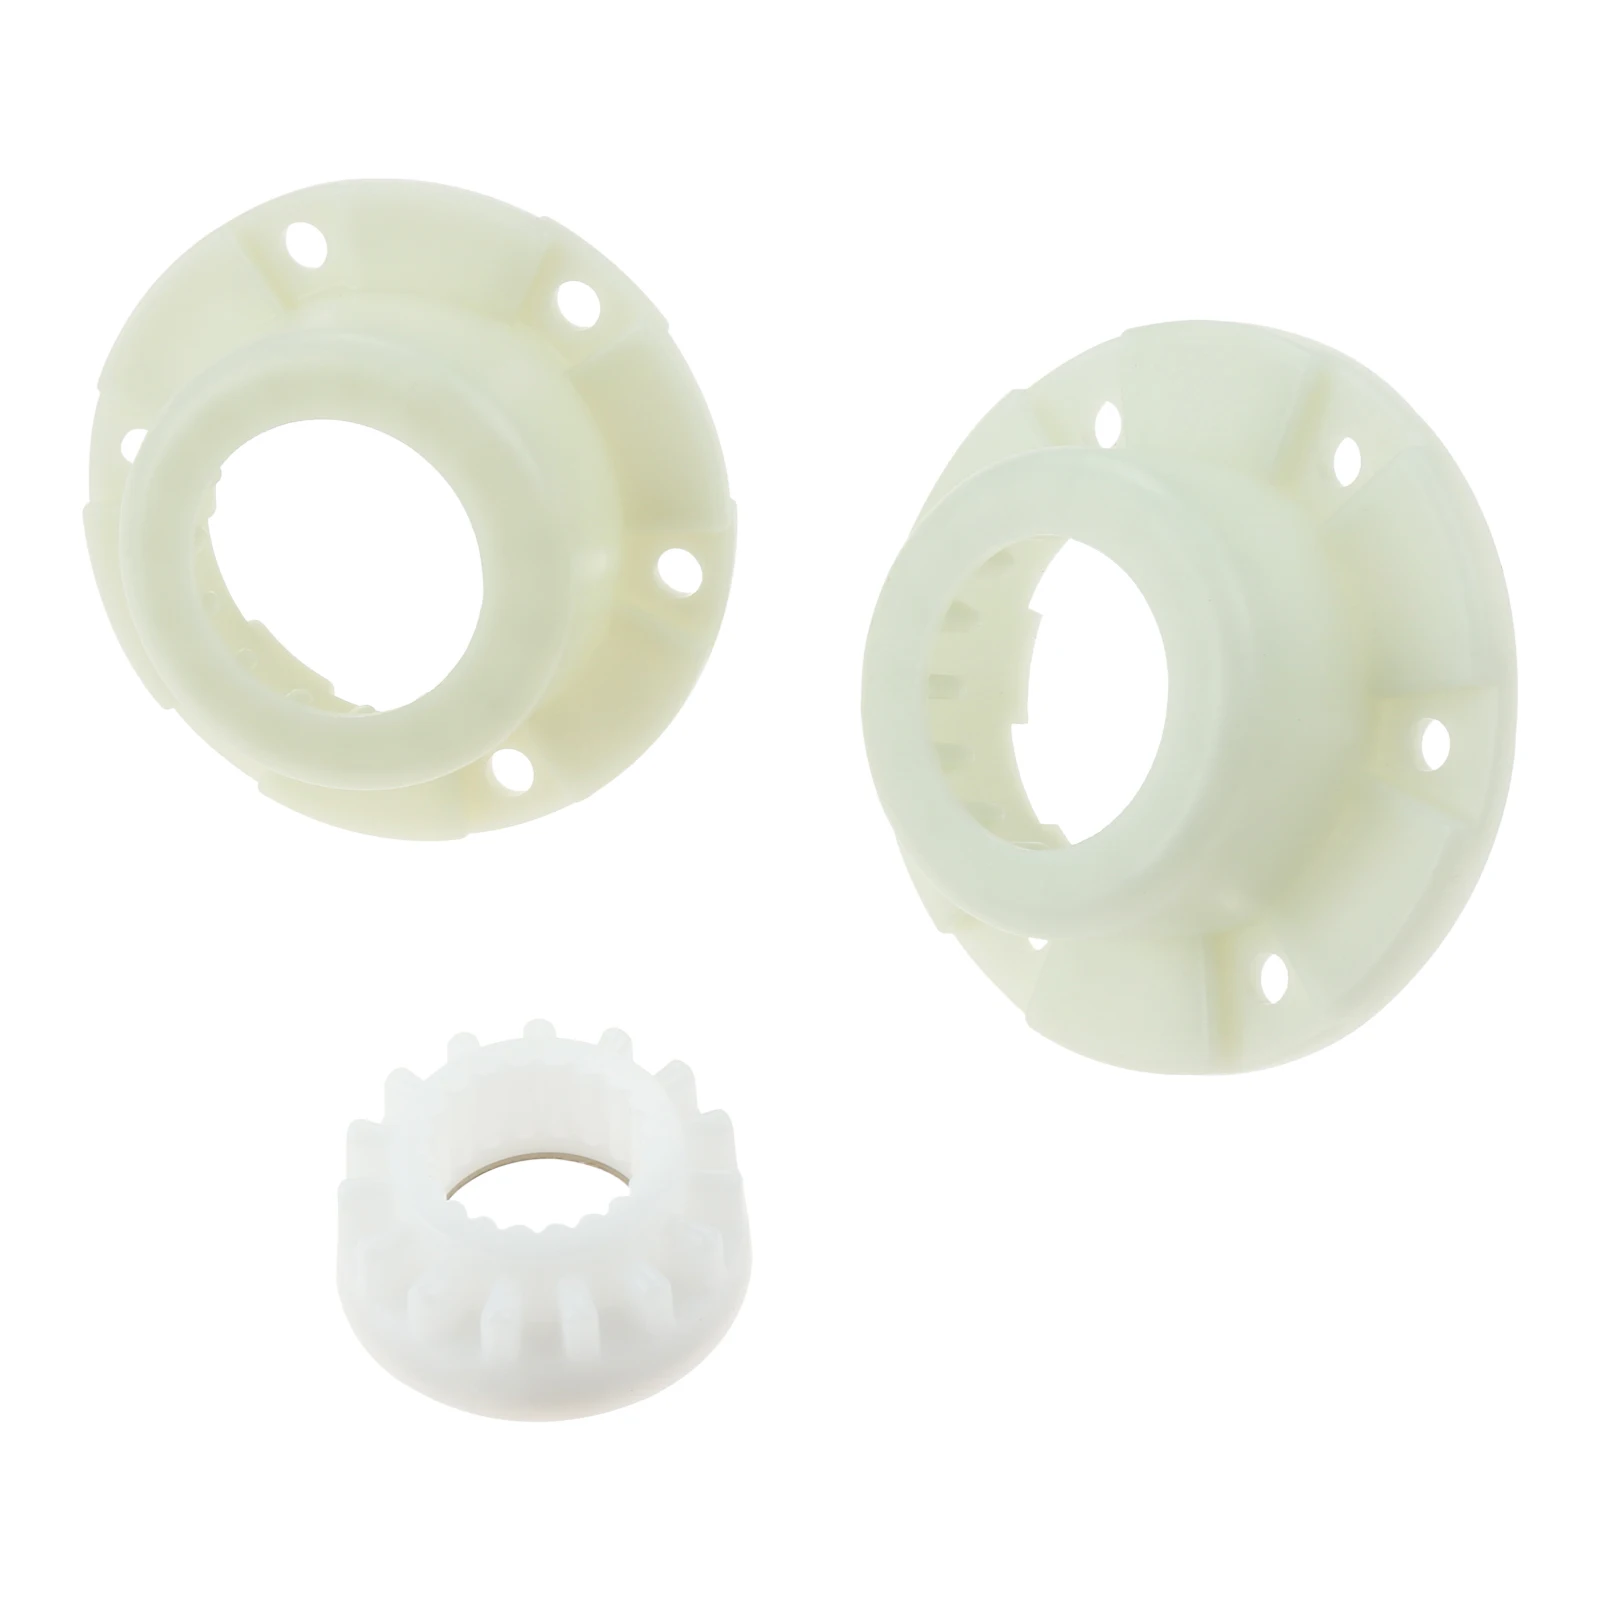 

3pcs/1kit W10820039 Washer Hubs Part fit for Whirlpool Kenmore Maytag Replaces Driver 280145 8545948 8545953 W10118114 AP5985205